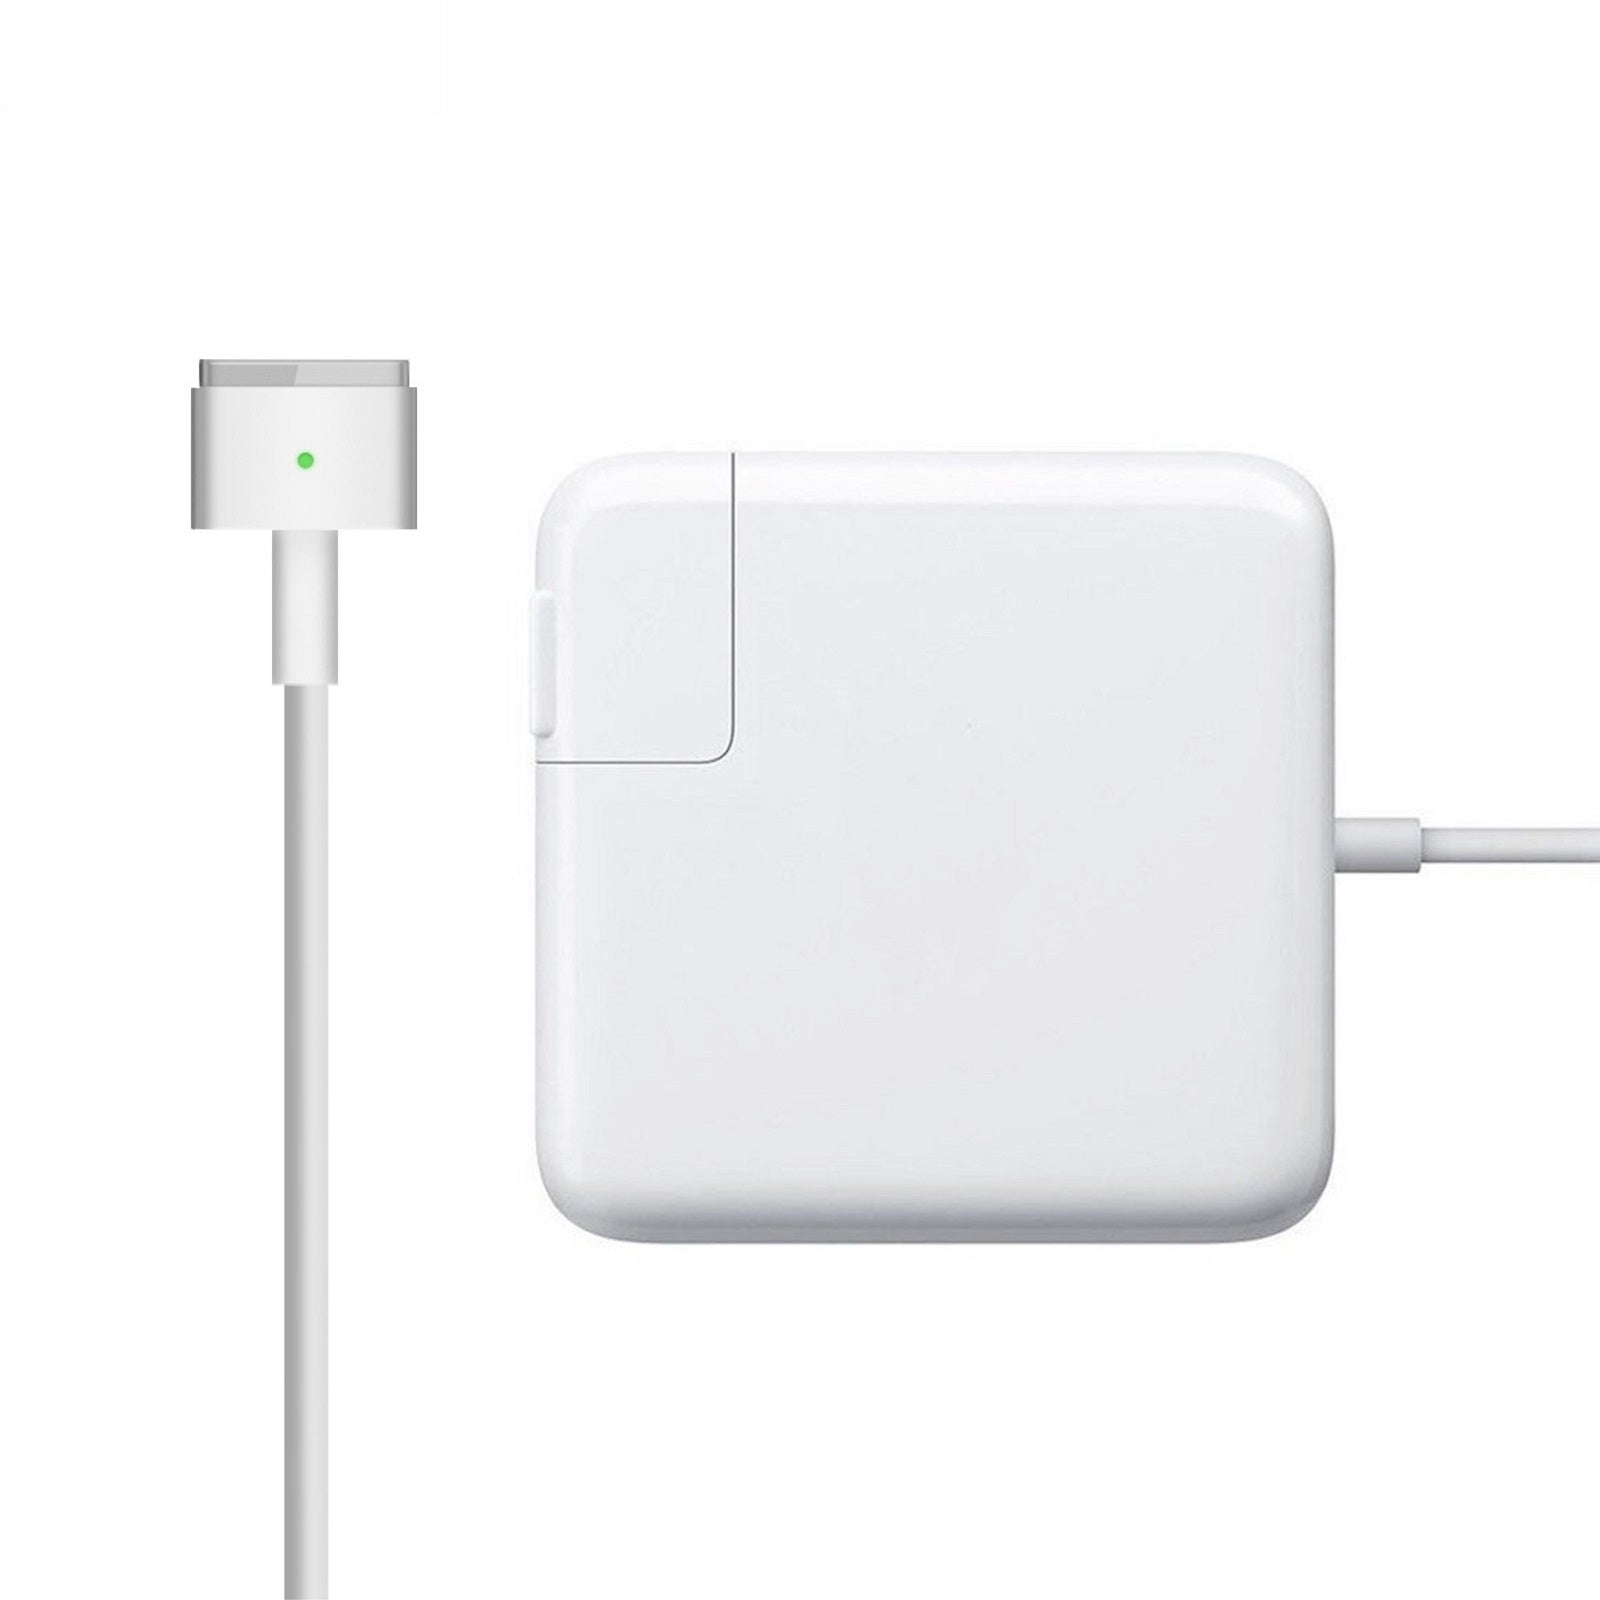 60W Power Adapter for Apple MagSafe 2 Macbook Pro Charger A1425/ A1435/  A1465